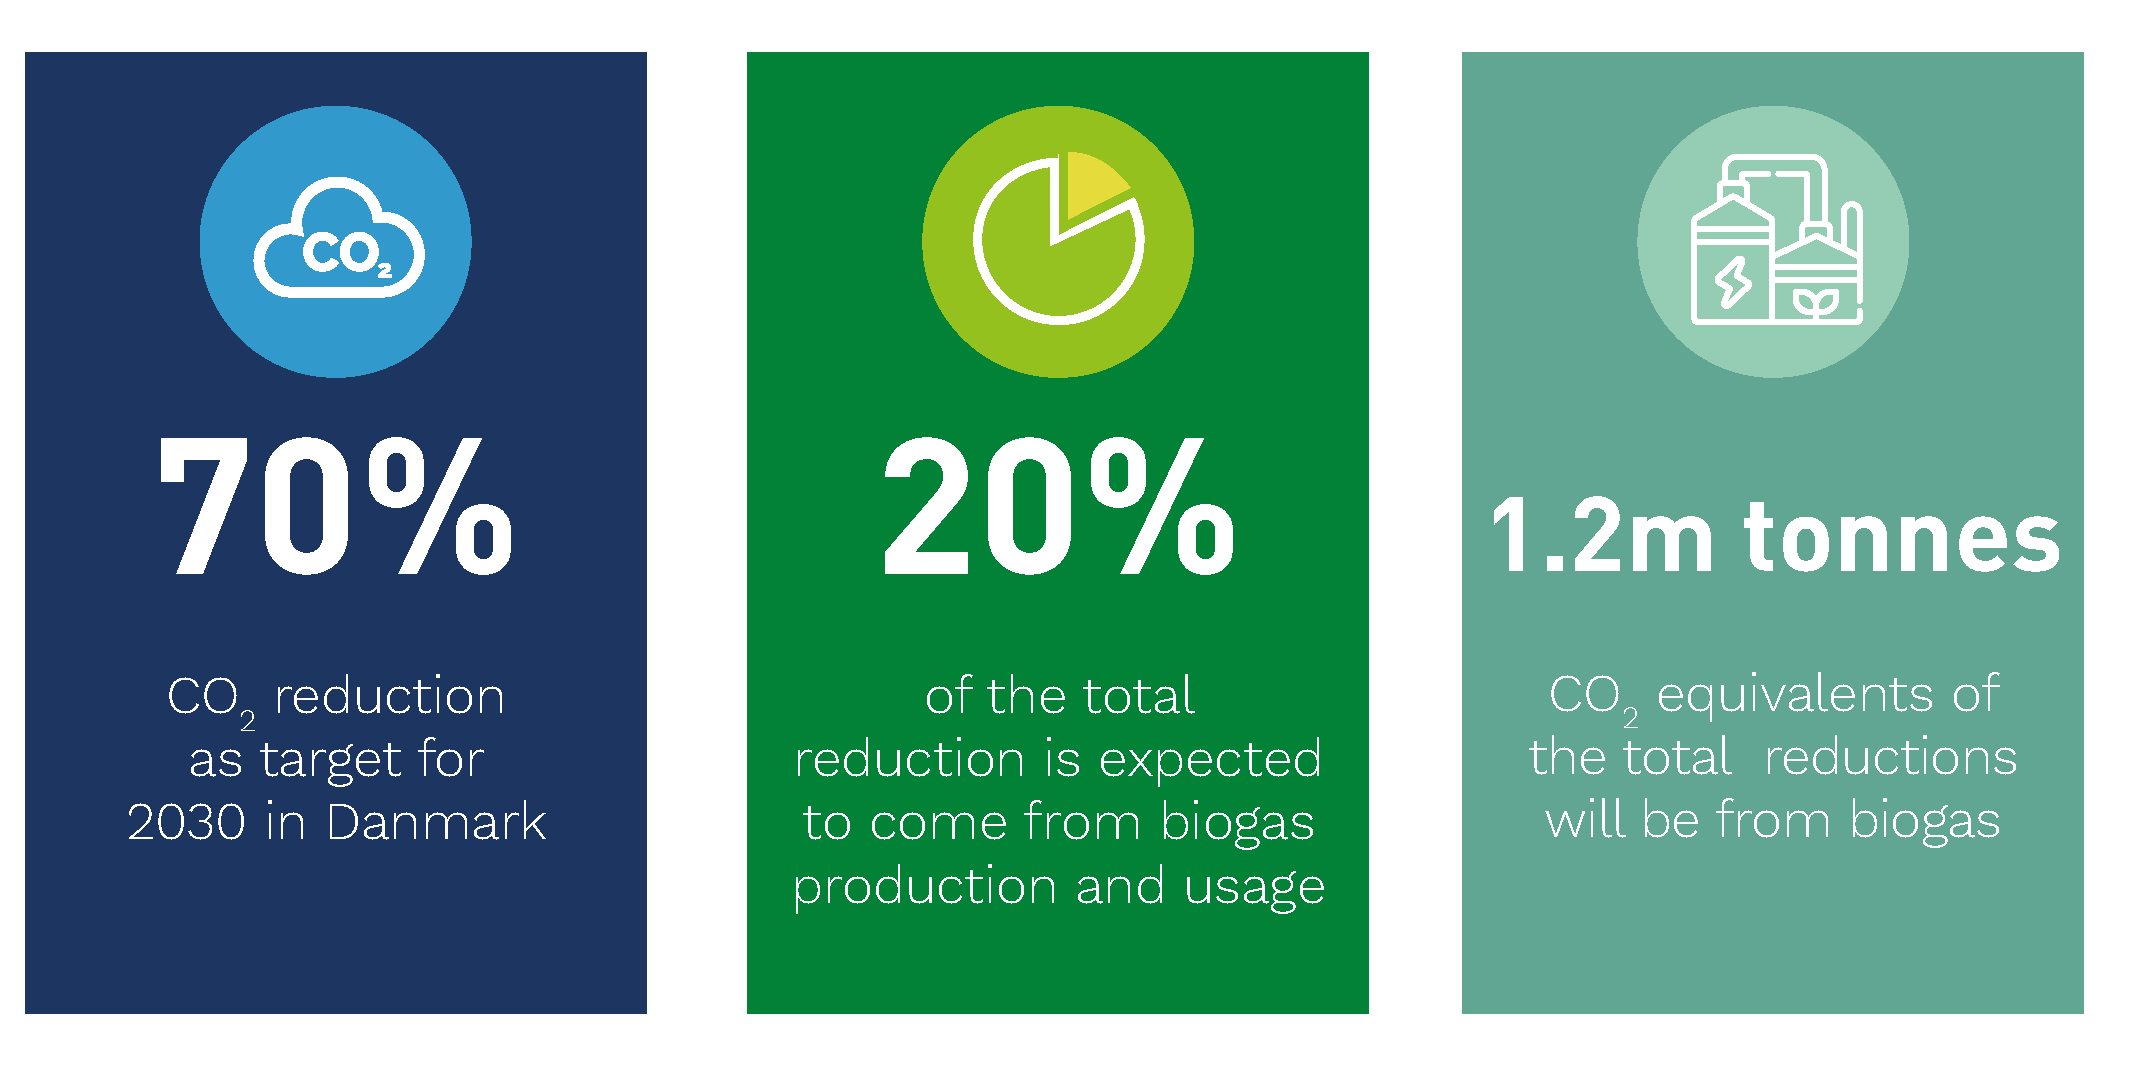 Biogas has a central position in meeting the 2030 climate target